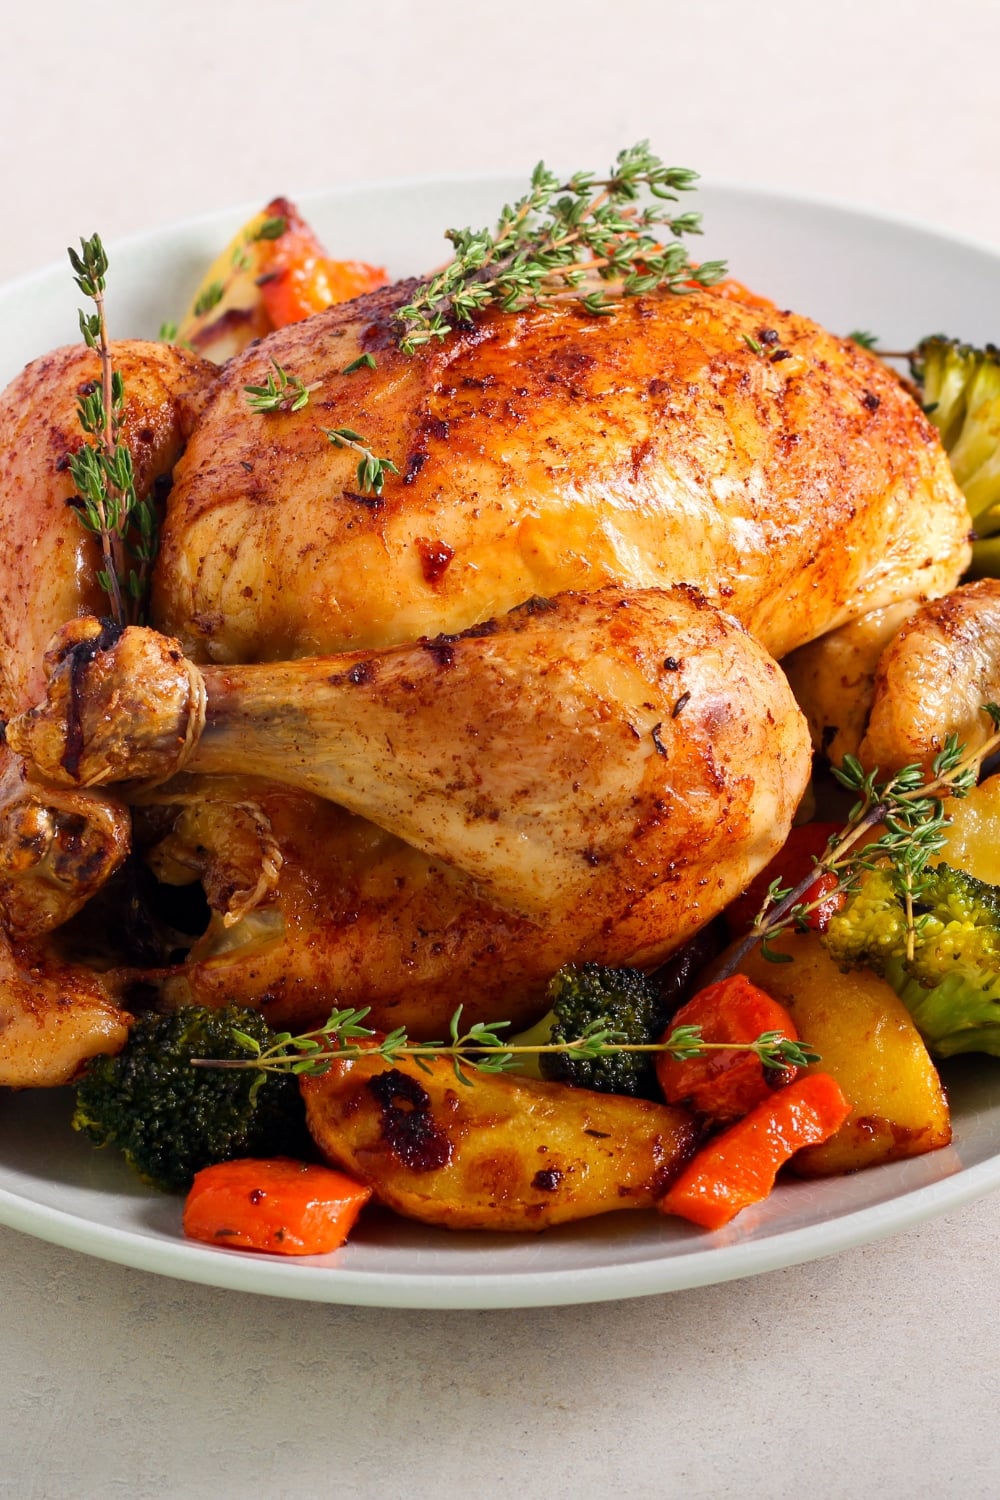 https://insanelygoodrecipes.com/wp-content/uploads/2023/03/Whole-Roasted-Chicken-with-Broccoli-Potatoes-and-Carrots.jpg